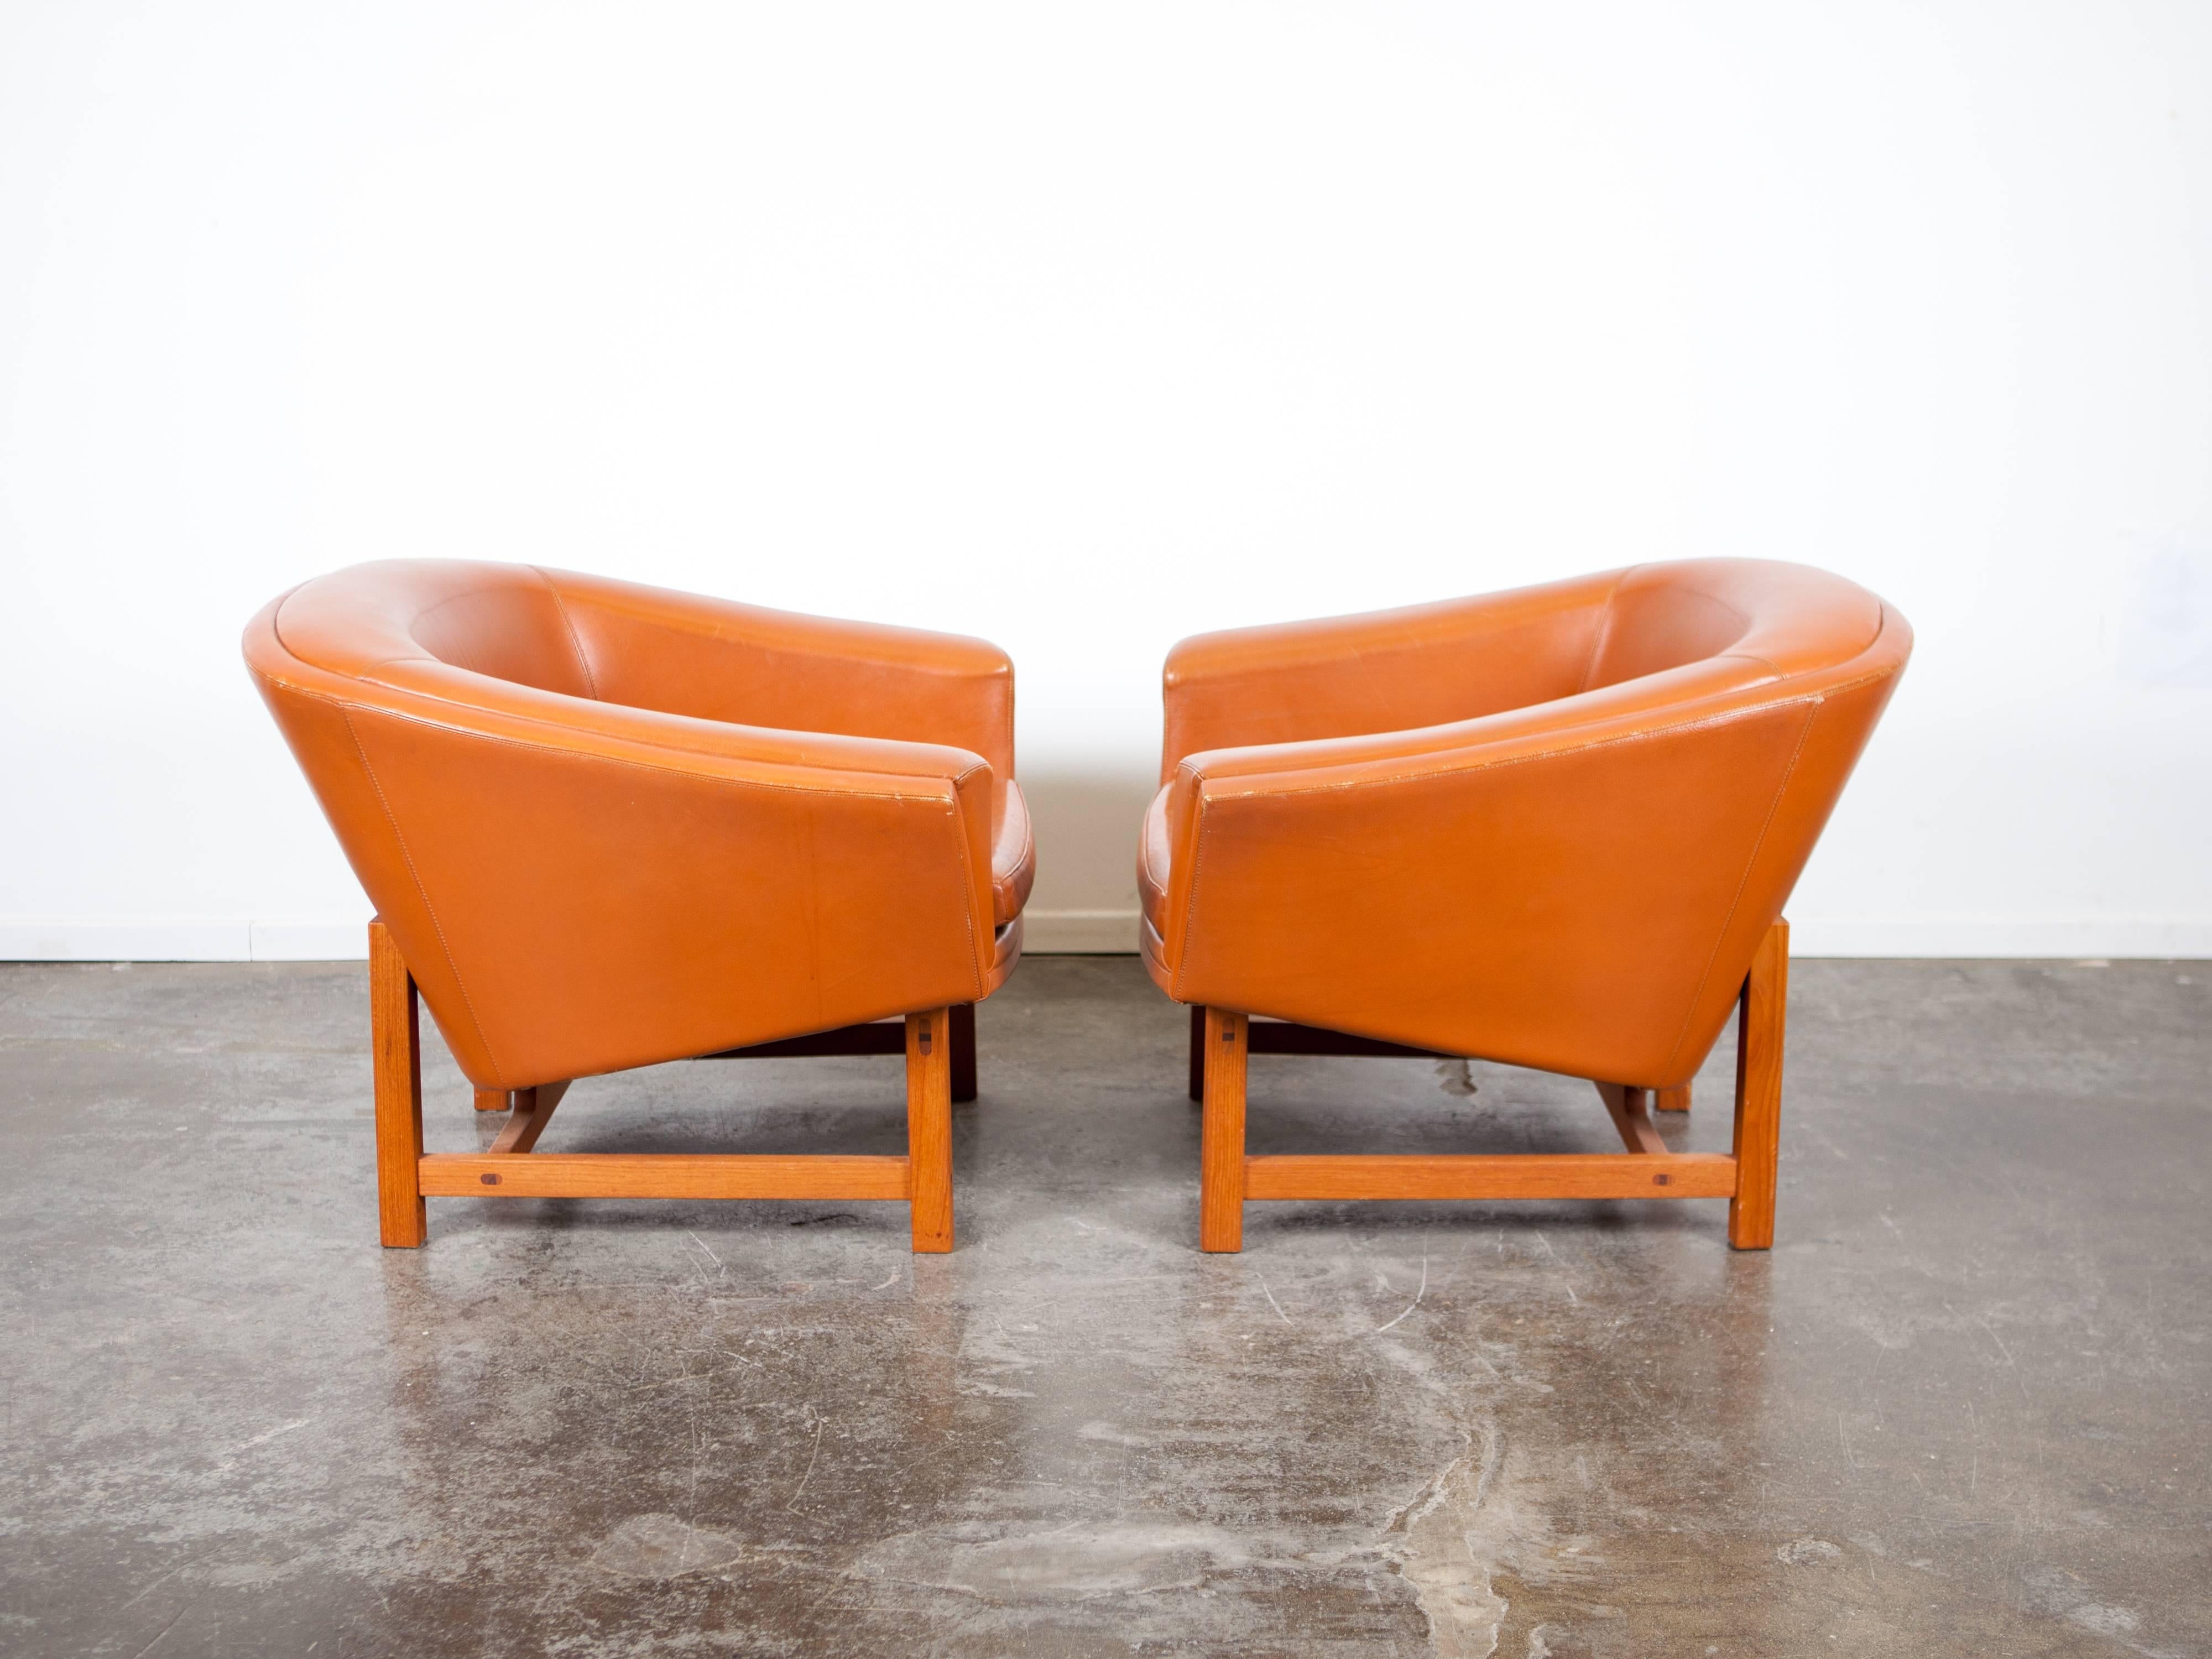 Tan leather tufted curved tub style lounge chairs designed by Lennart Bender, model Corona, made in Sweden by Ulferts. Wonderfully aged leather, no rips or tears, on a solid teak frame.

